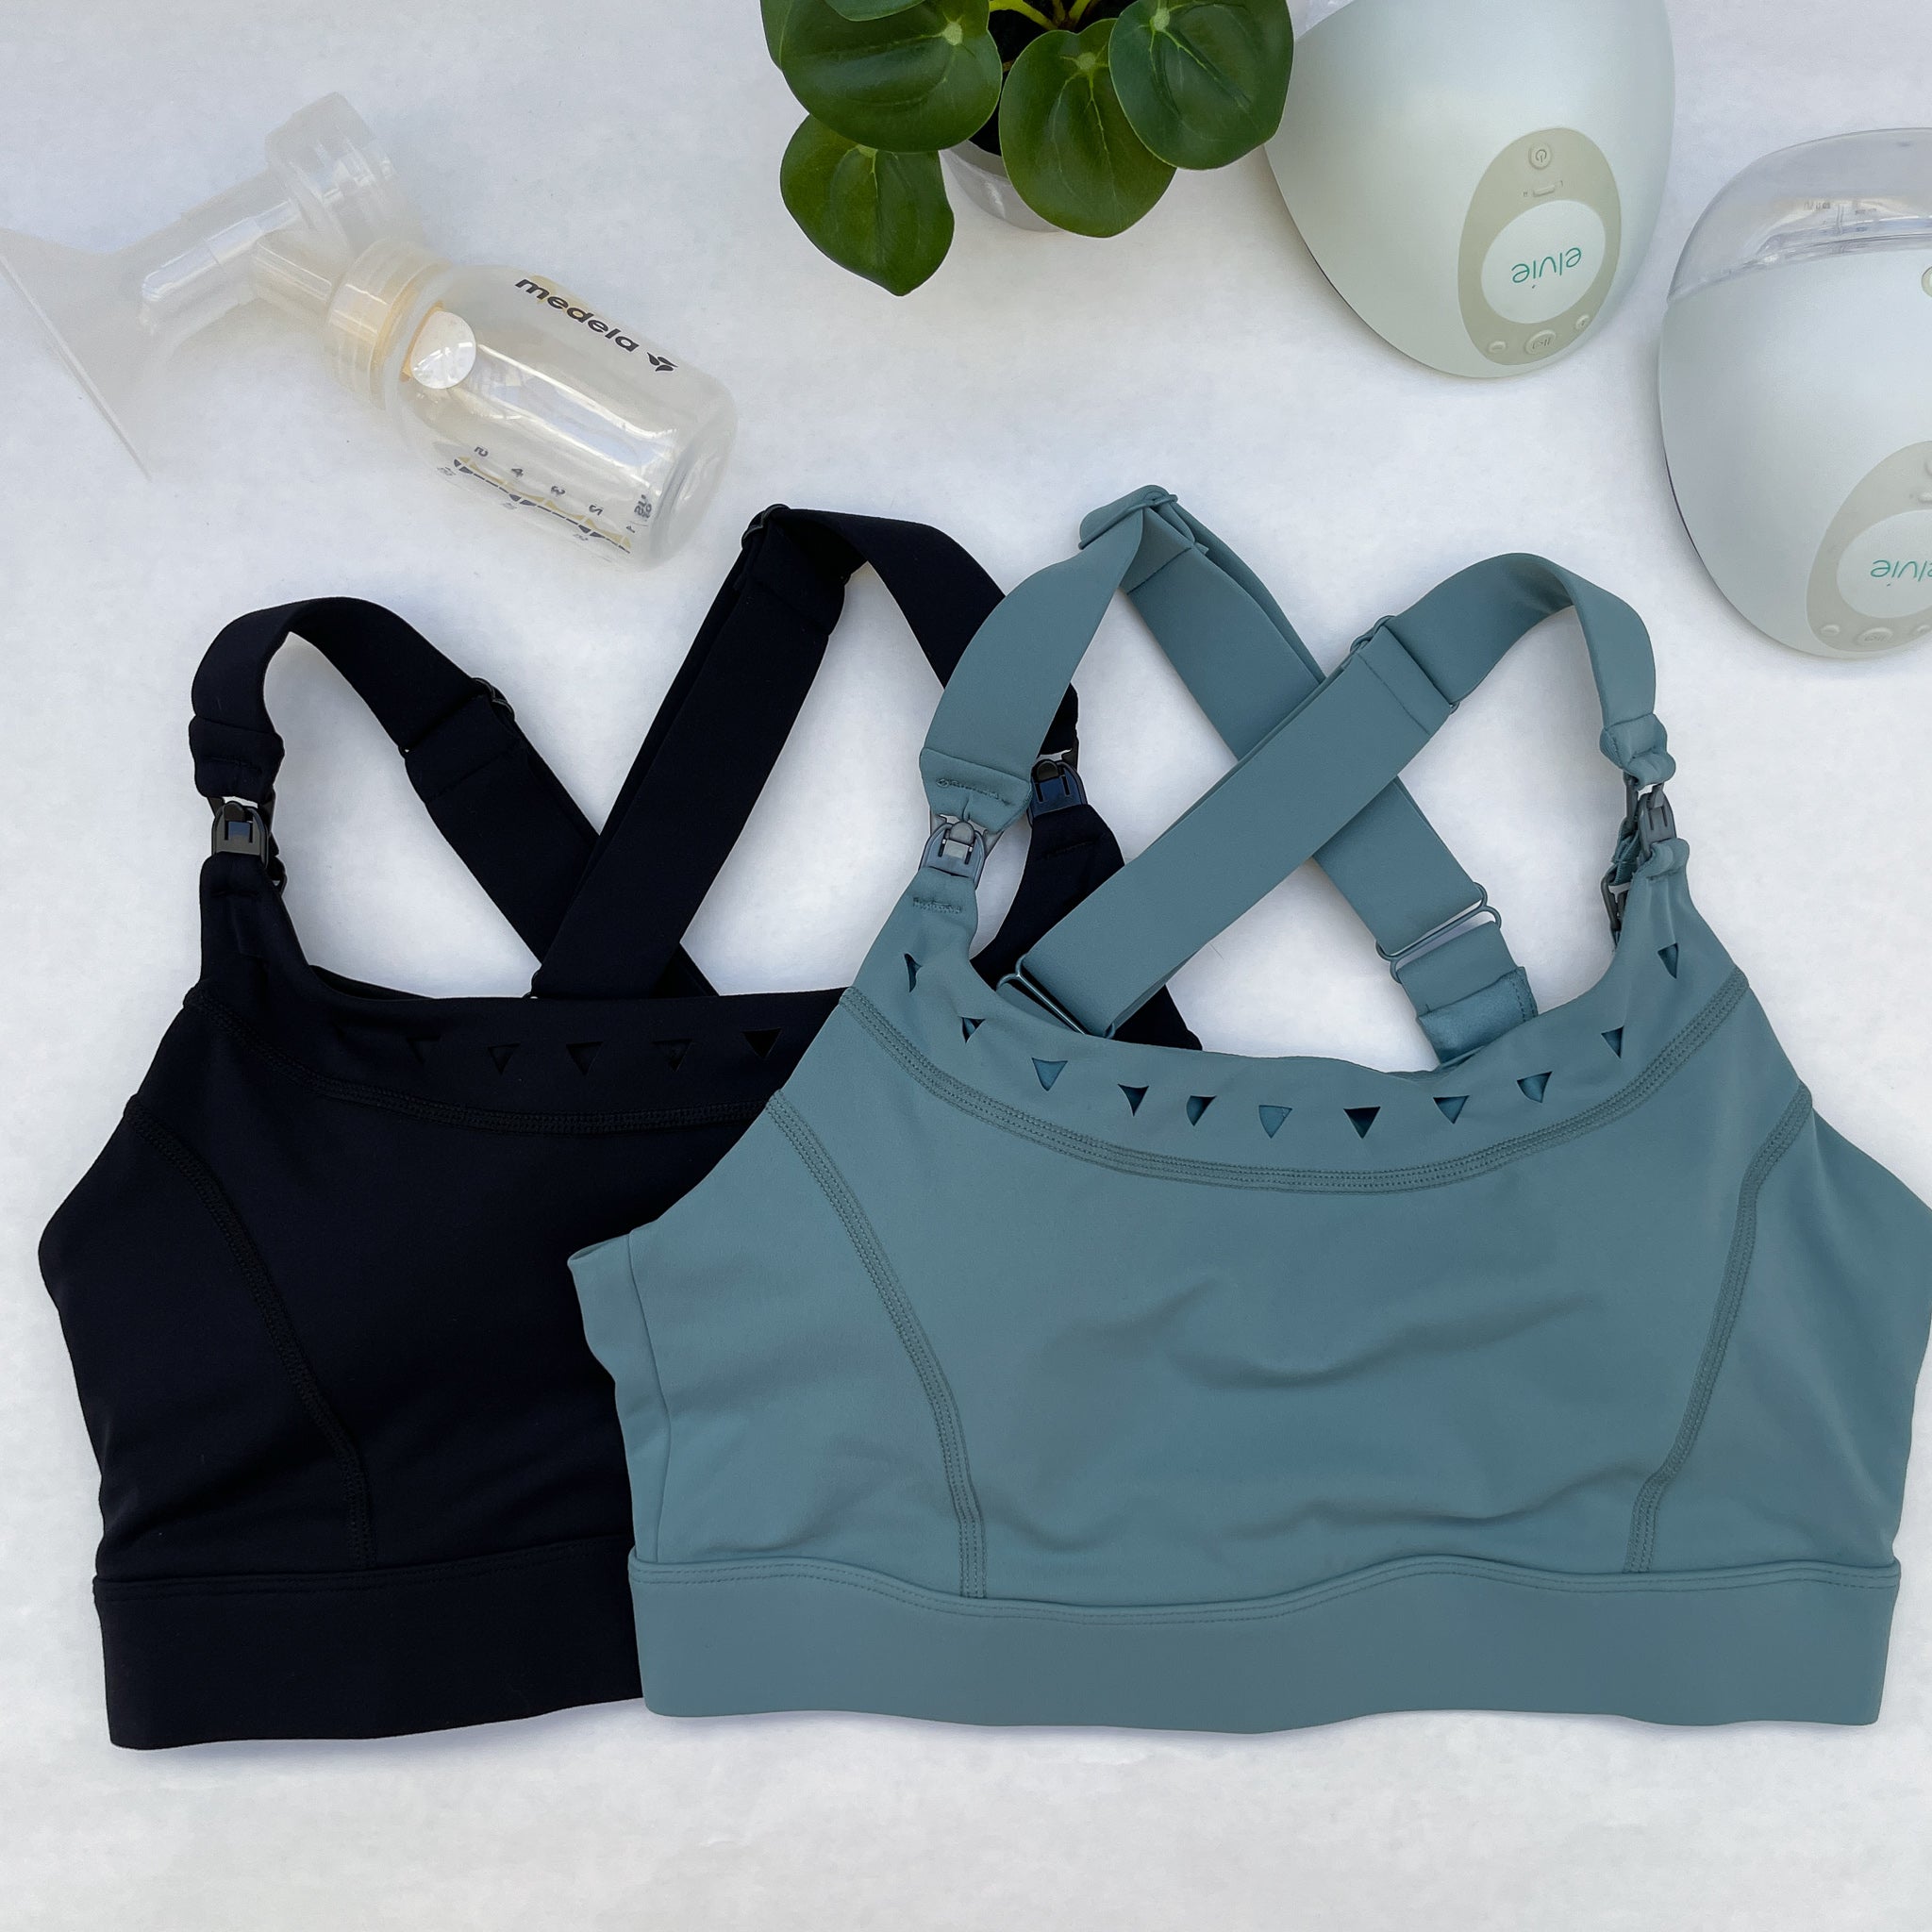 Avon - Product Detail : Ira Non-wire Soft Cup Bra